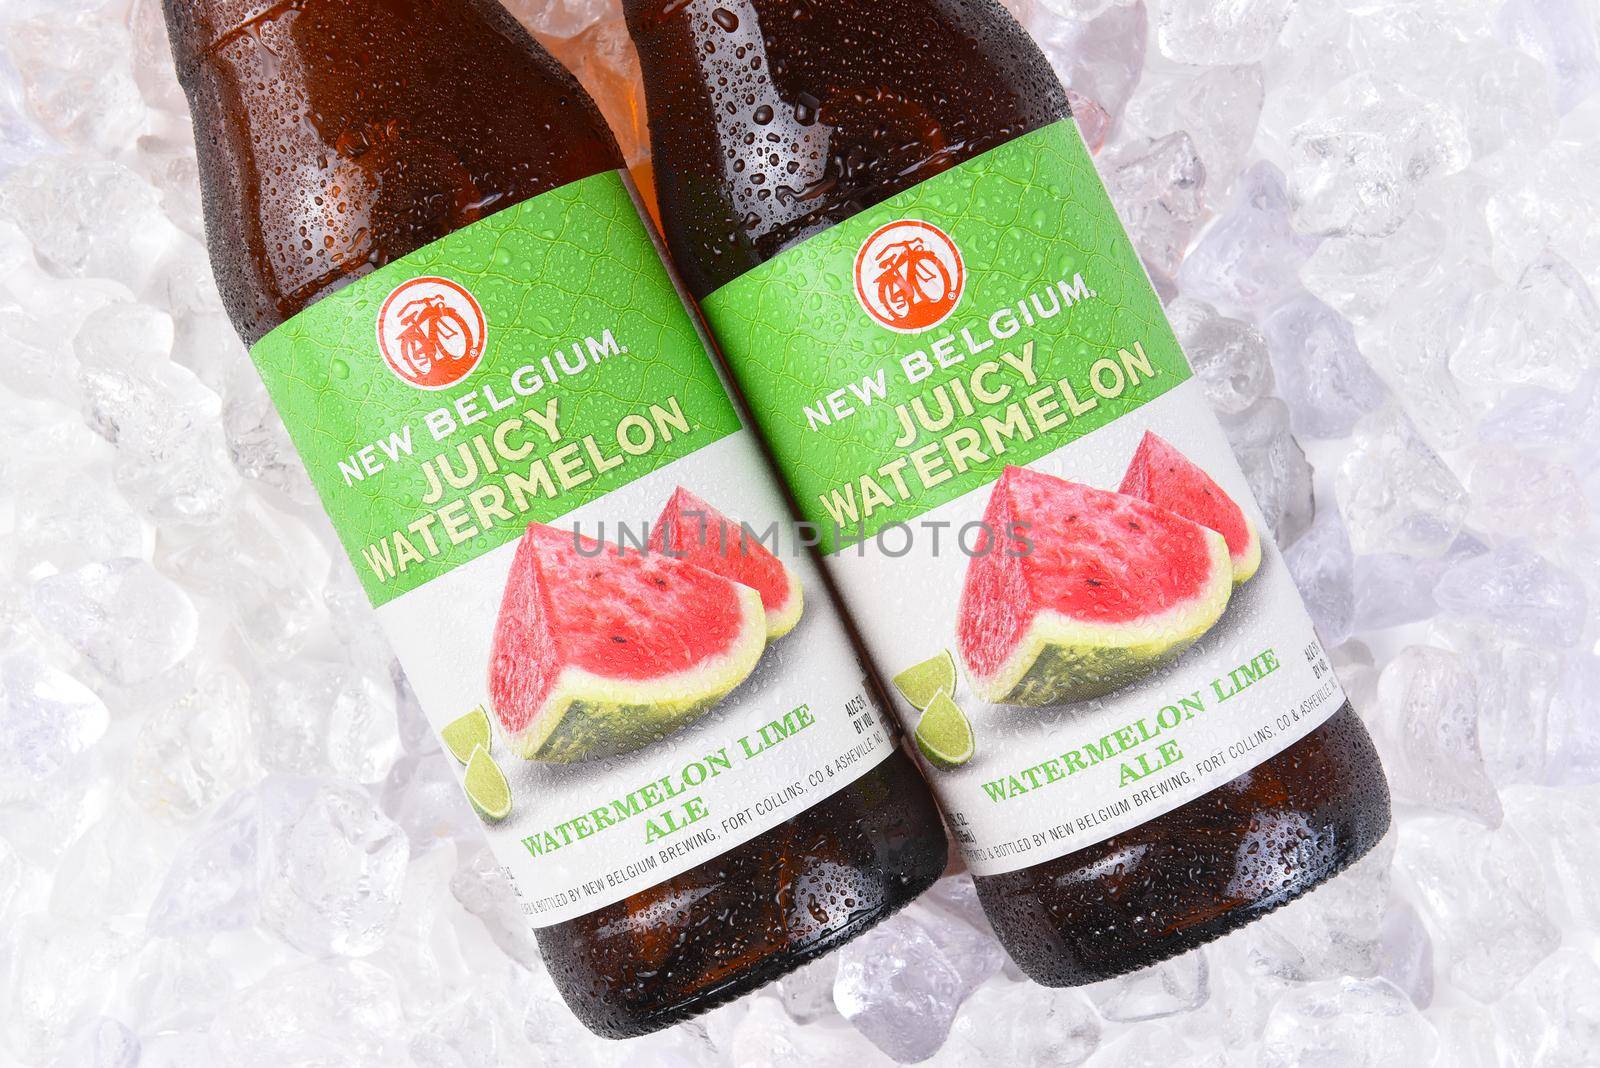 IRVINE, CA - JULY 17, 2017: New Belgium juicy Watermelon Lime Ale bottles on ice. A craft brewery located in Fort Collins, Colorado. It was opened in 1991 by Jeff Lebesch and Kim Jordan.